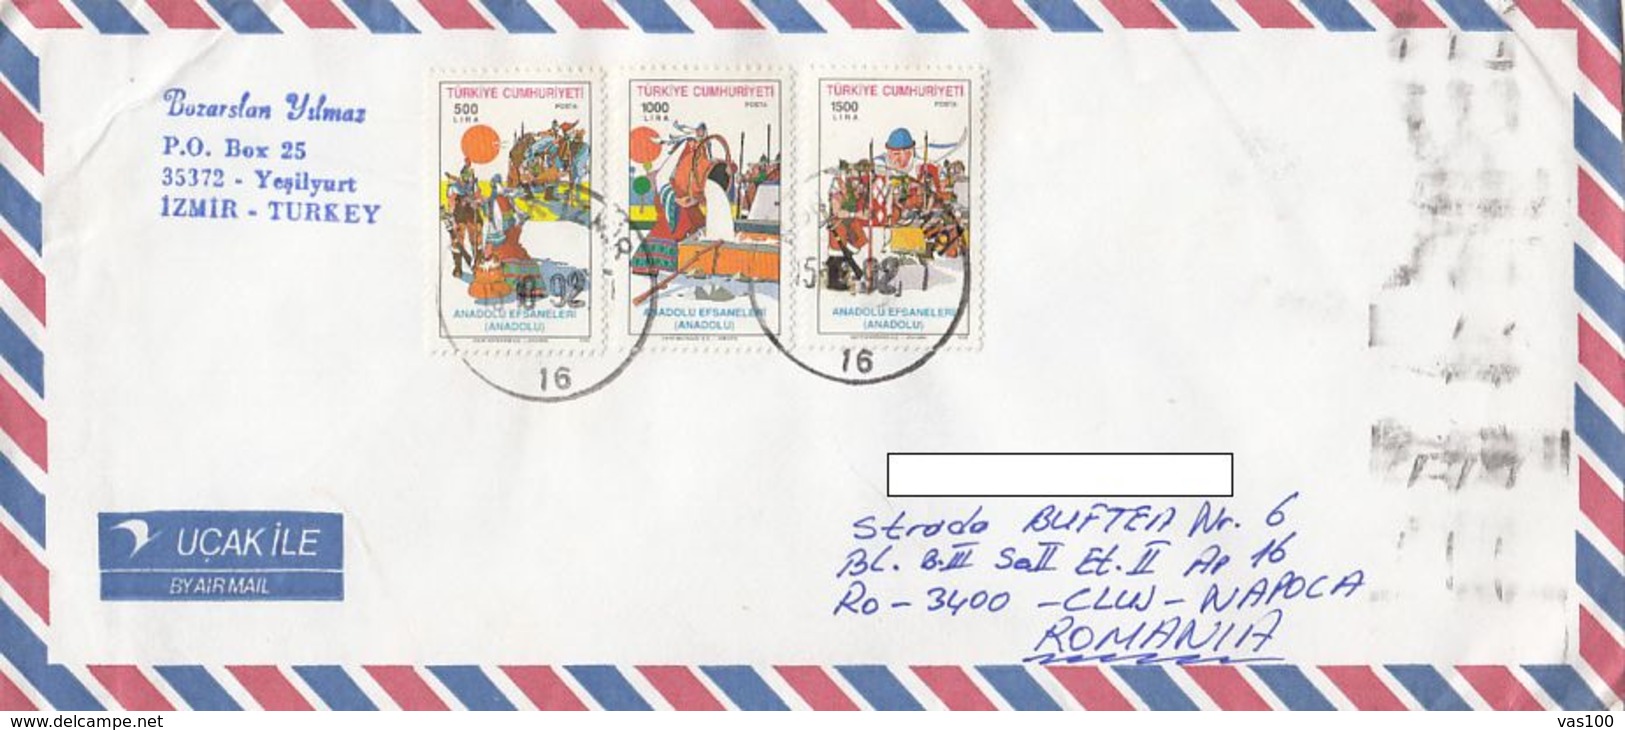 LEGEND OF ANATOLIA, STAMPS ON COVER, 1992, TURKEY - Covers & Documents